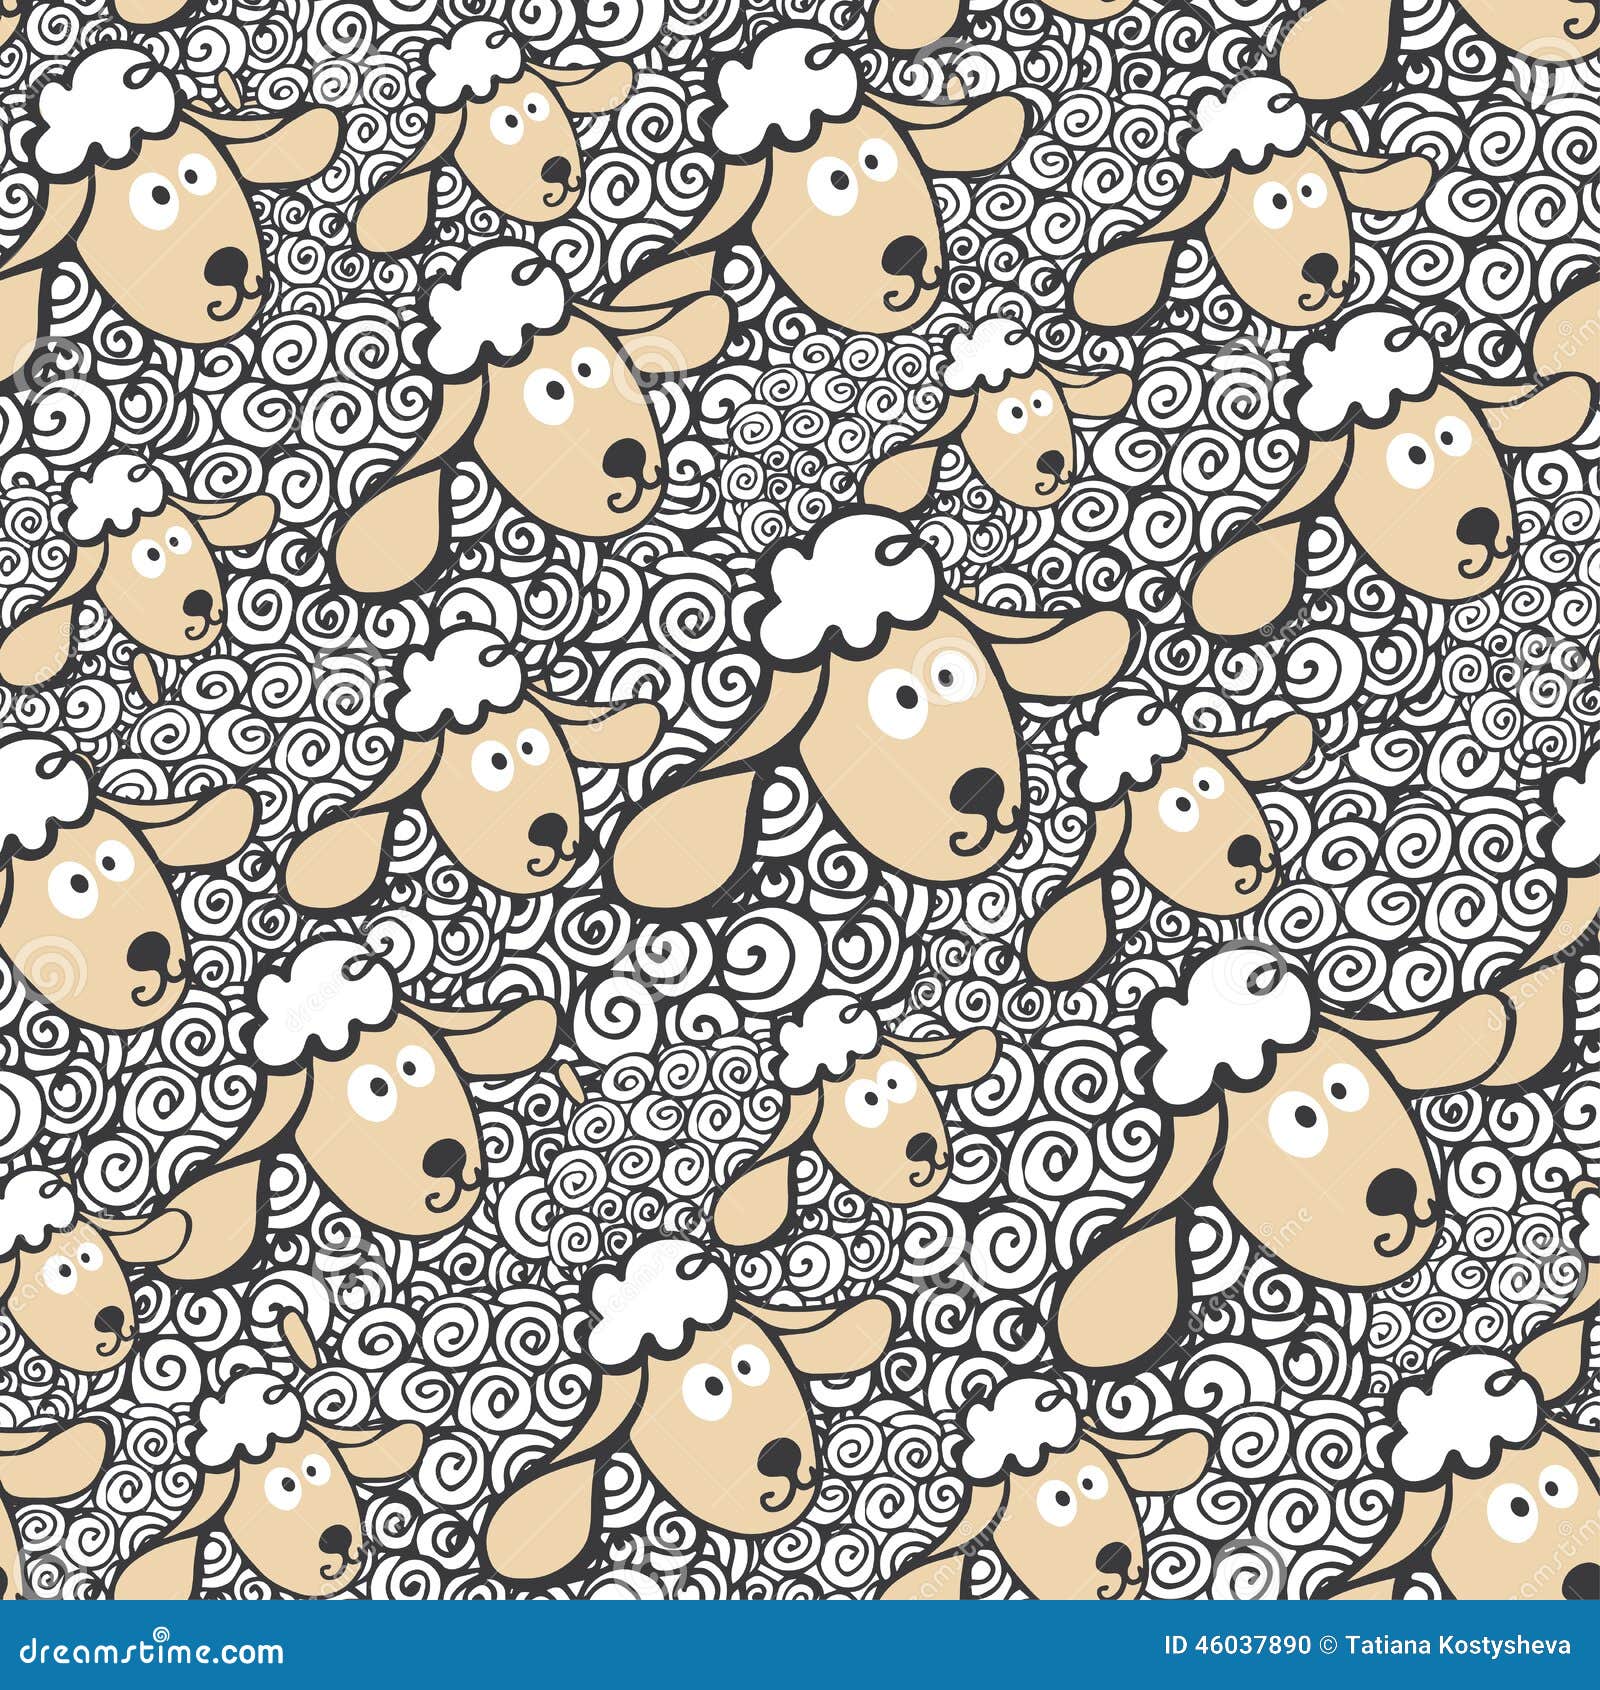 New Year Flock Of Sheep  Seamless Pattern Stock Vector 